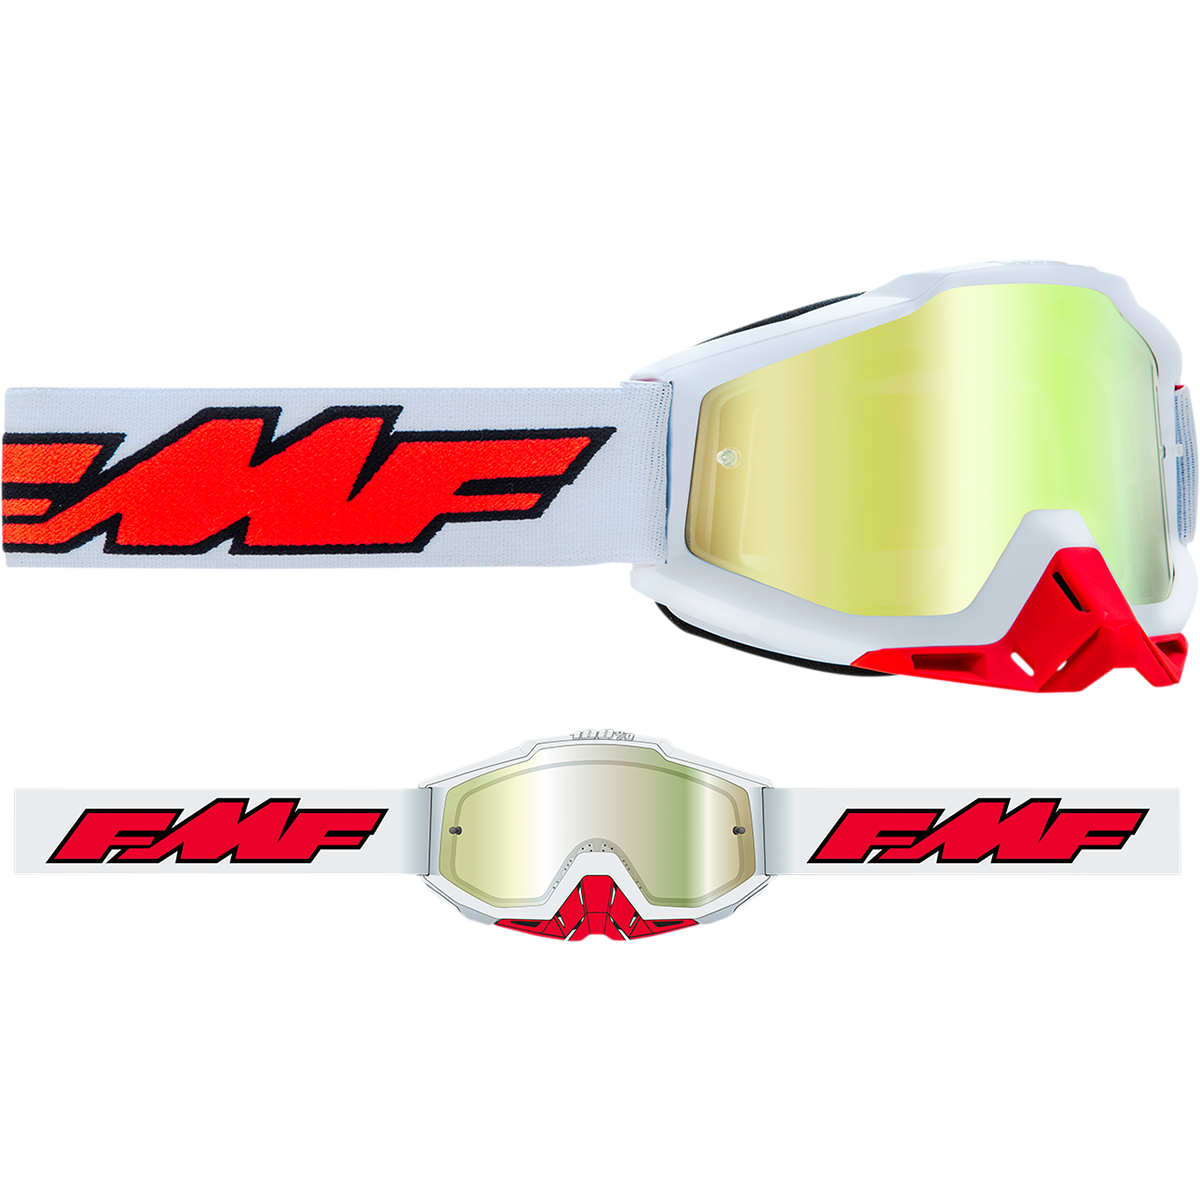 FMF VISION PowerBomb Goggles - Rocket - White - True Gold F